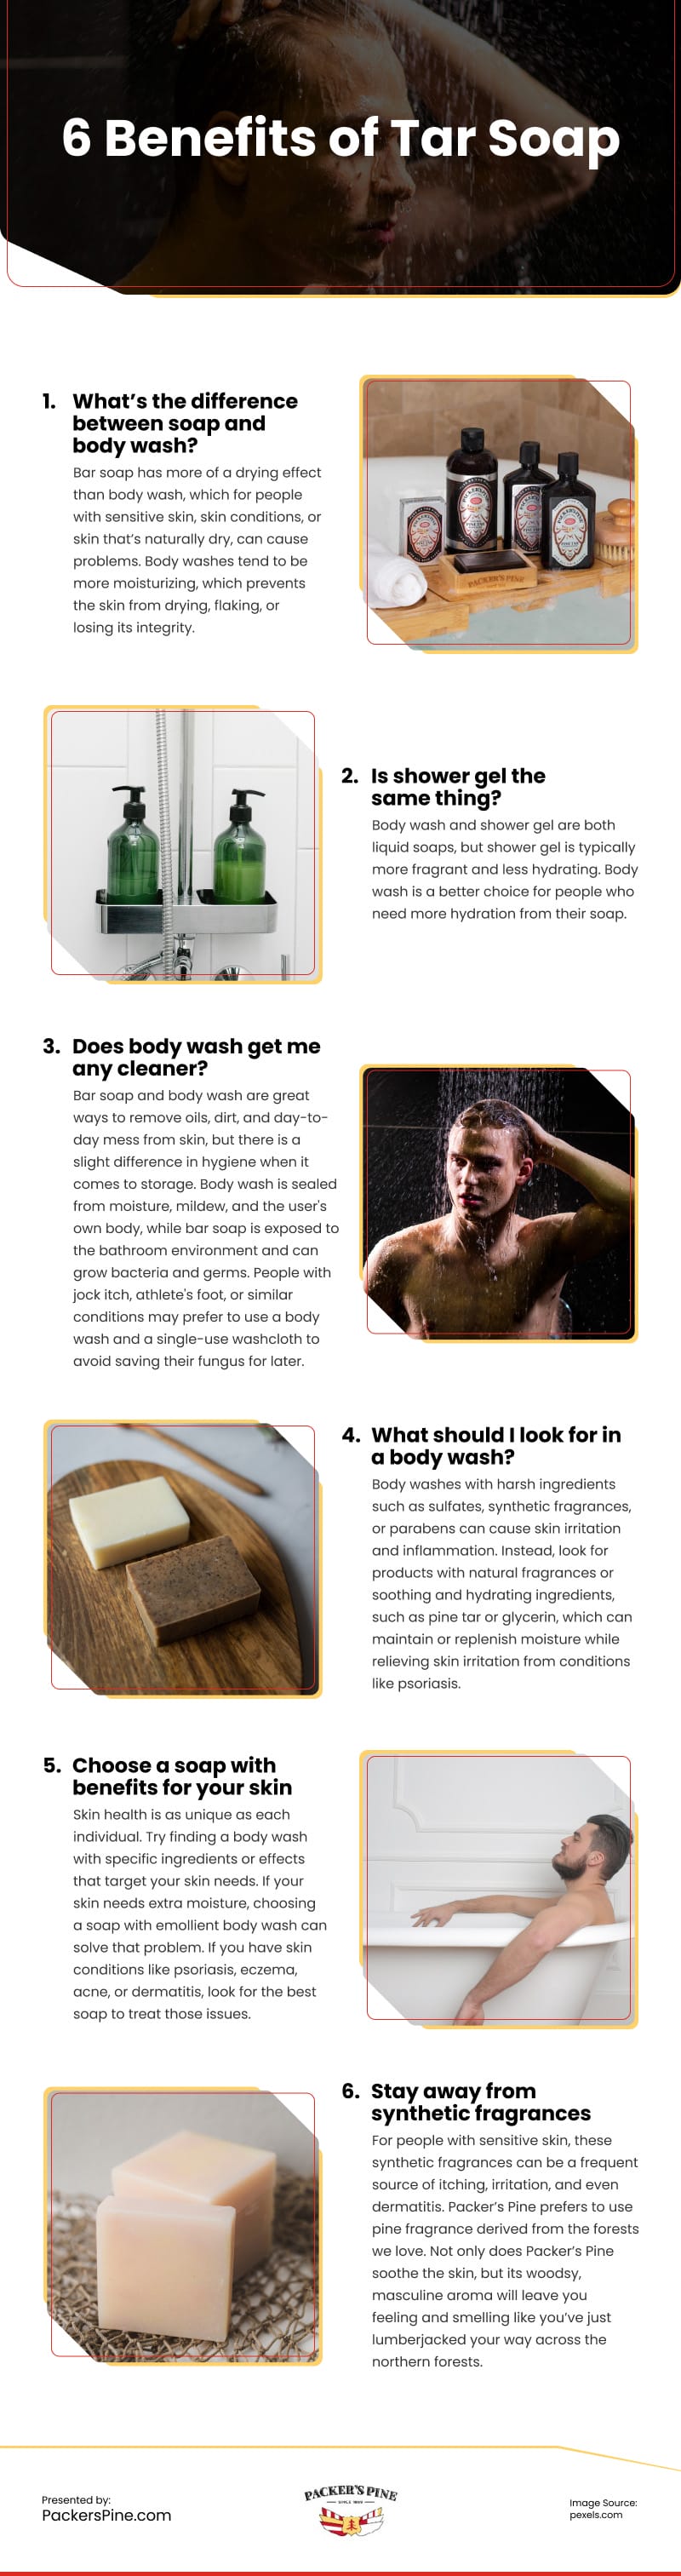 6 Benefits Of Tar Soap Infographic